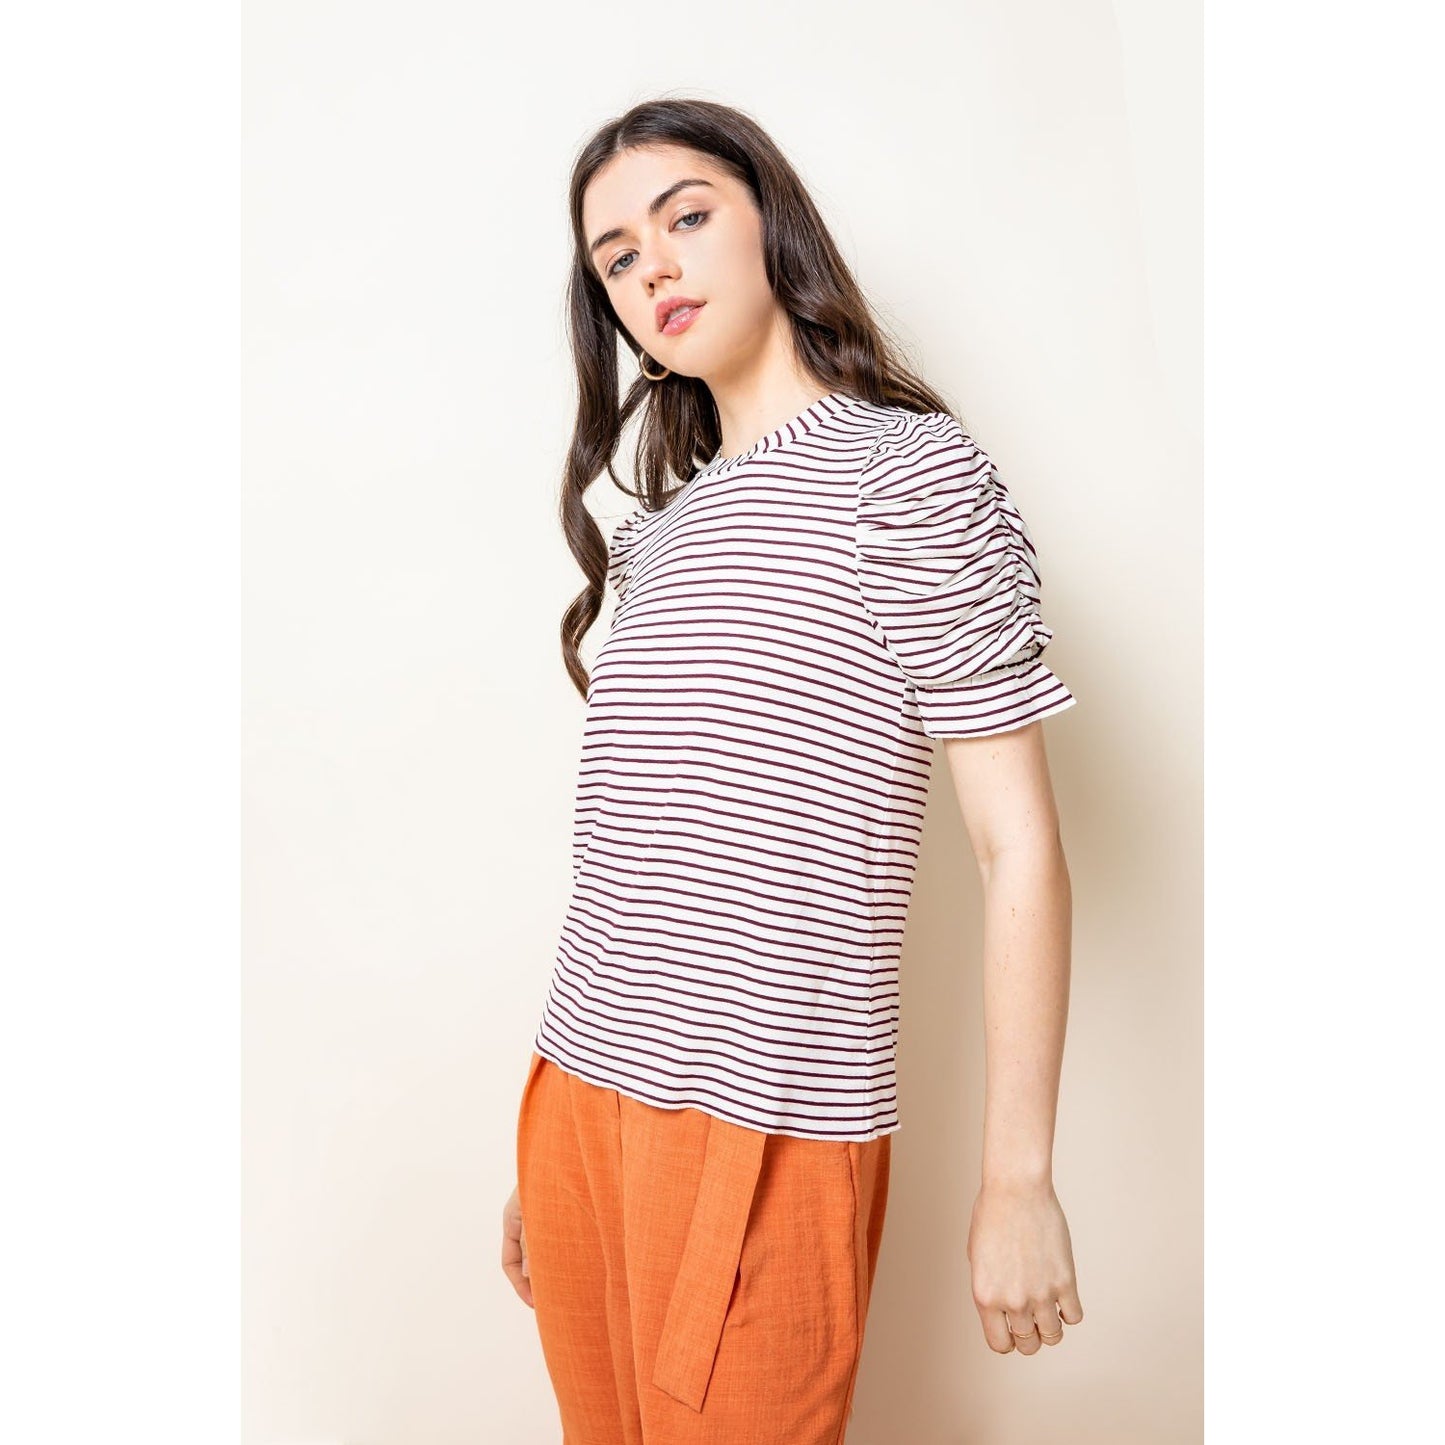 Picture This Maroon Striped Top